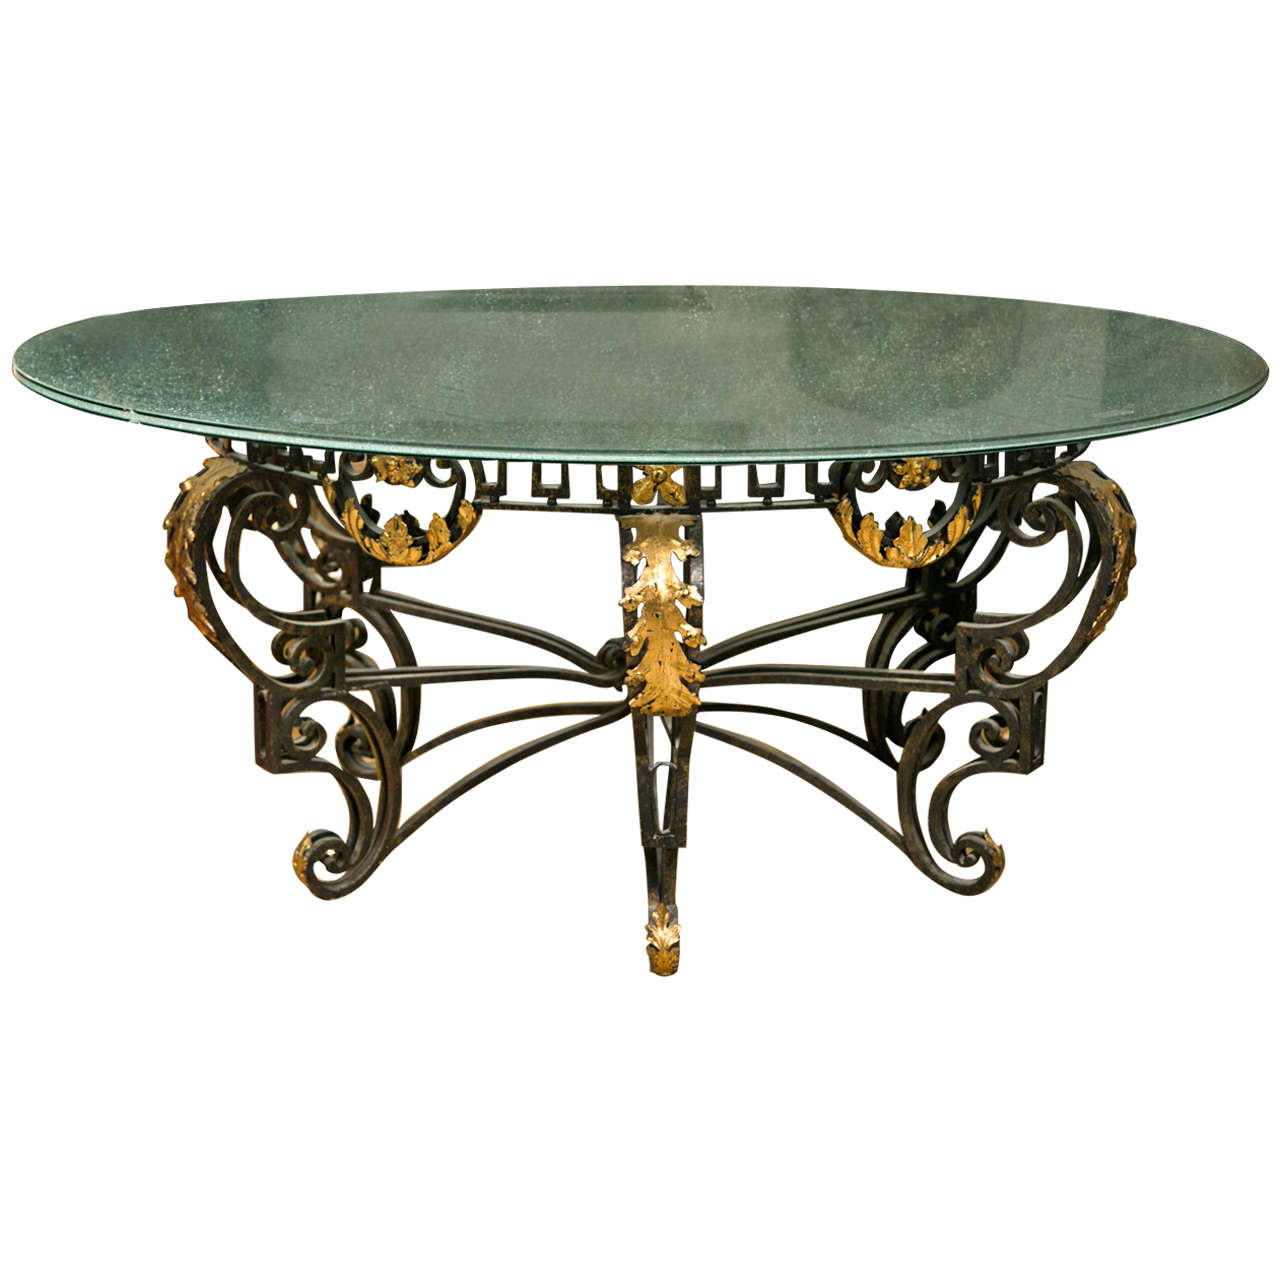 Art Nouveau Style Crackle Glass Round Dining Table